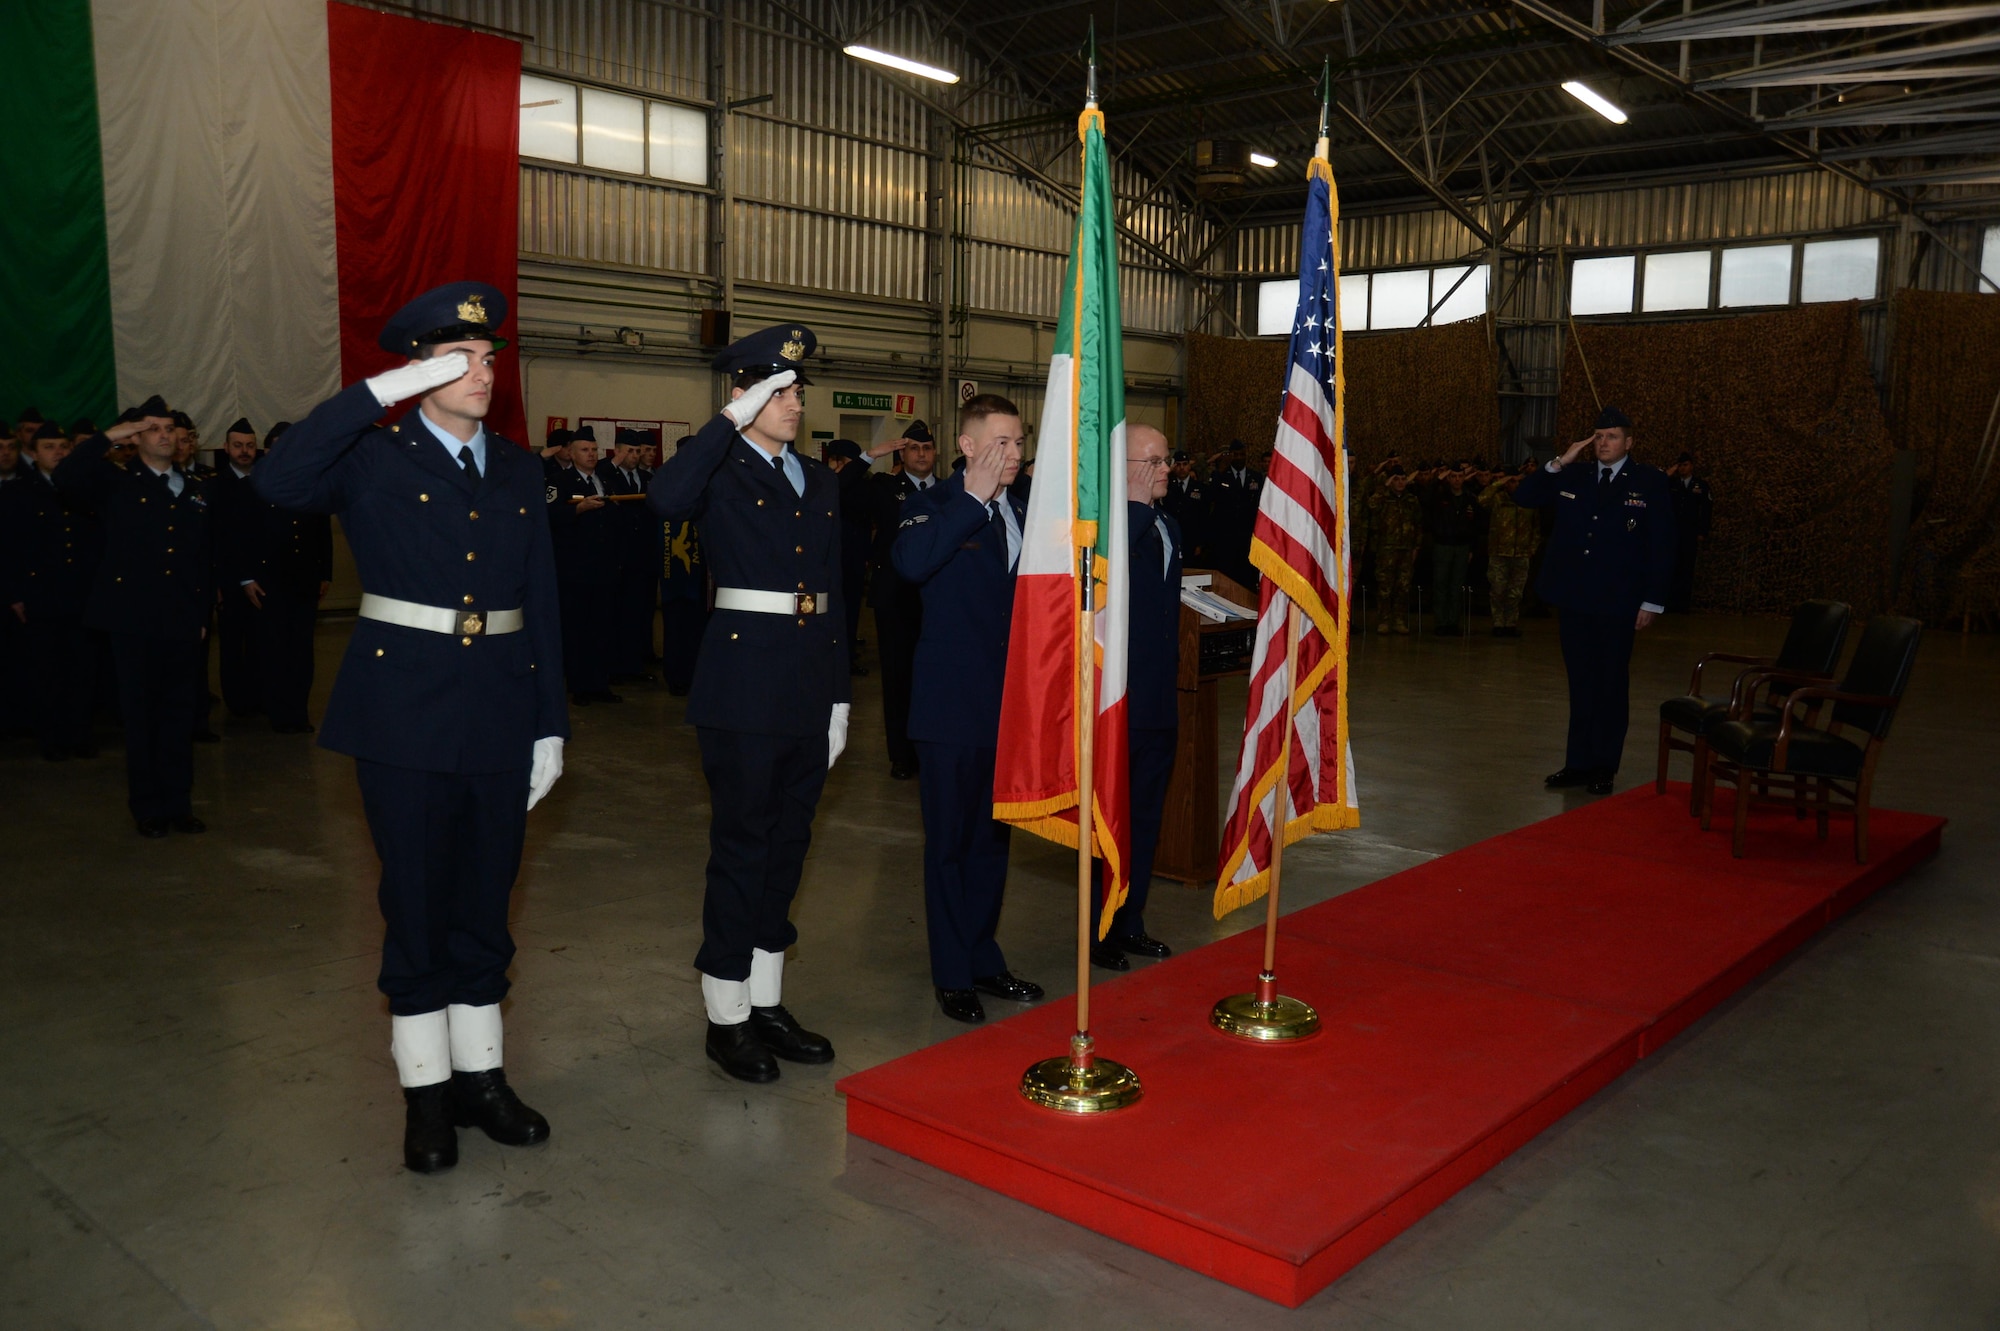 U.S. Air Force Airmen assigned to 704th Munitions Support Squadron and Italian Air Force Airmen assigned to 6th STORMO salute the Italian and U.S. flags during a ceremony in a hangar at Ghedi Air Base, Italy, Jan. 31, 2014. The ceremony paid tribute to the 50th anniversary of the Italian-American partnership established at Ghedi Air Base in December 1963.  (U.S. Air Force photo/Staff Sgt. Joe W. McFadden)